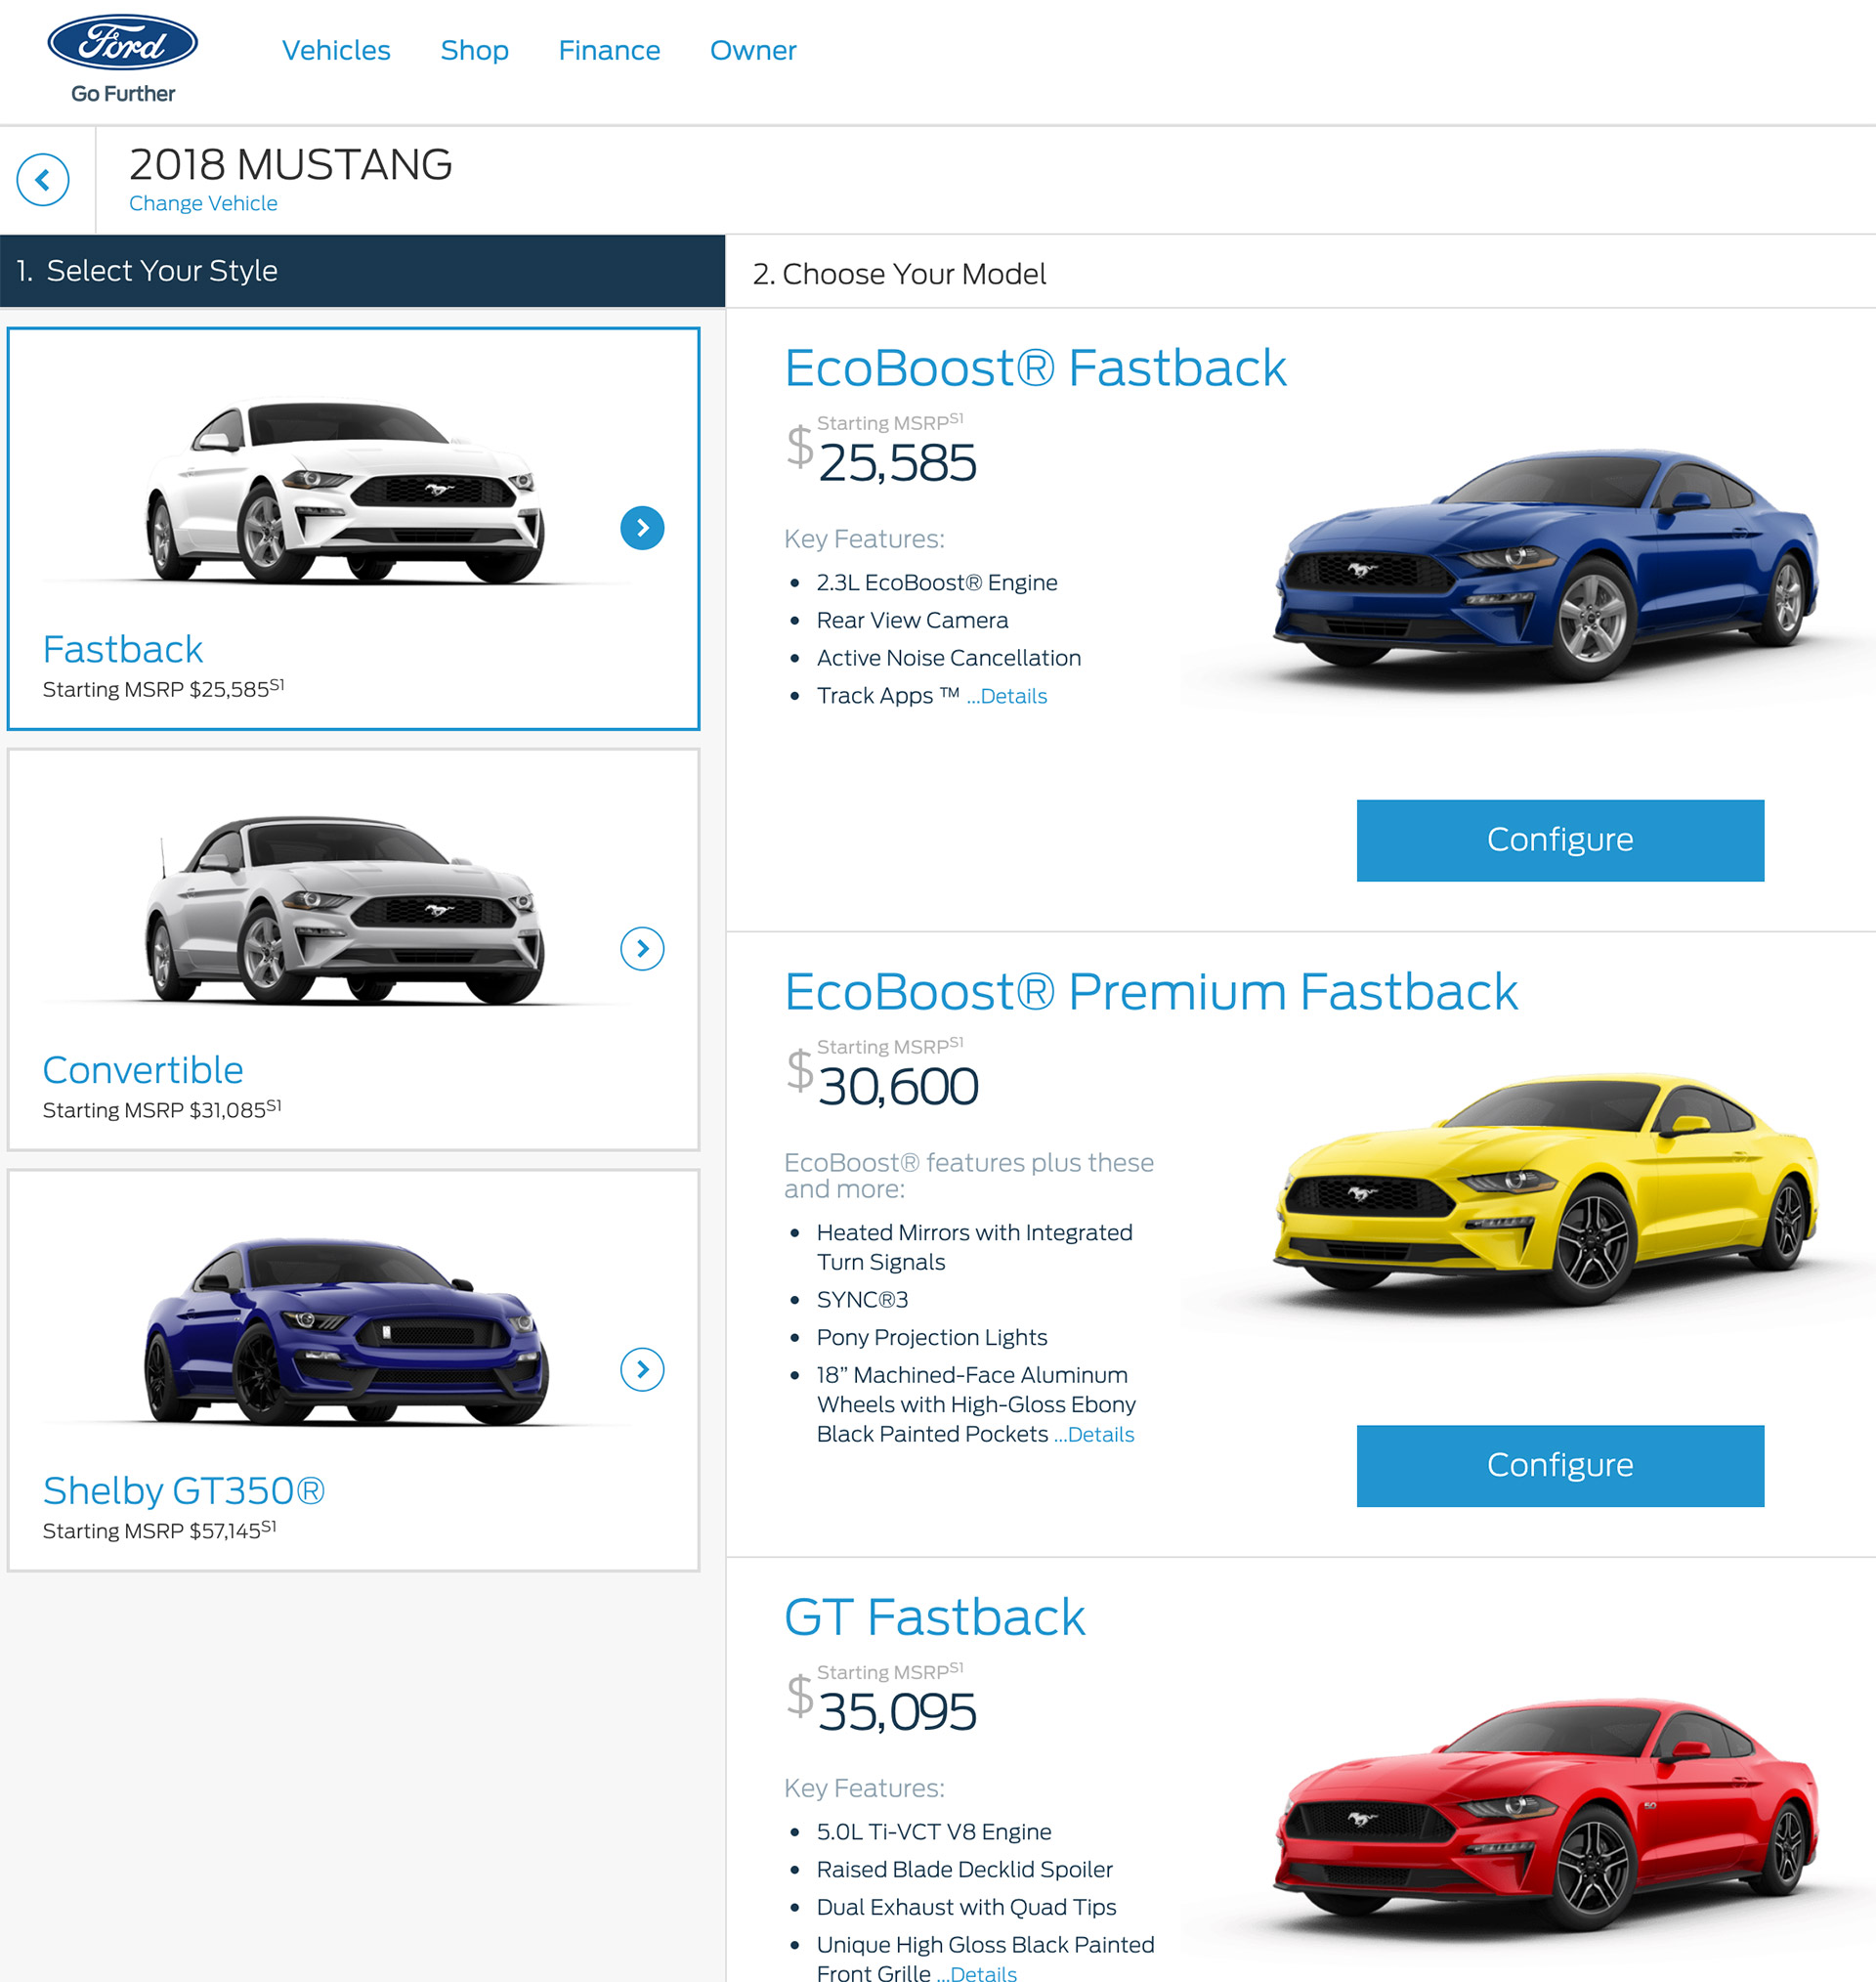 2018 Mustang Configurator and Pricing Goes Live